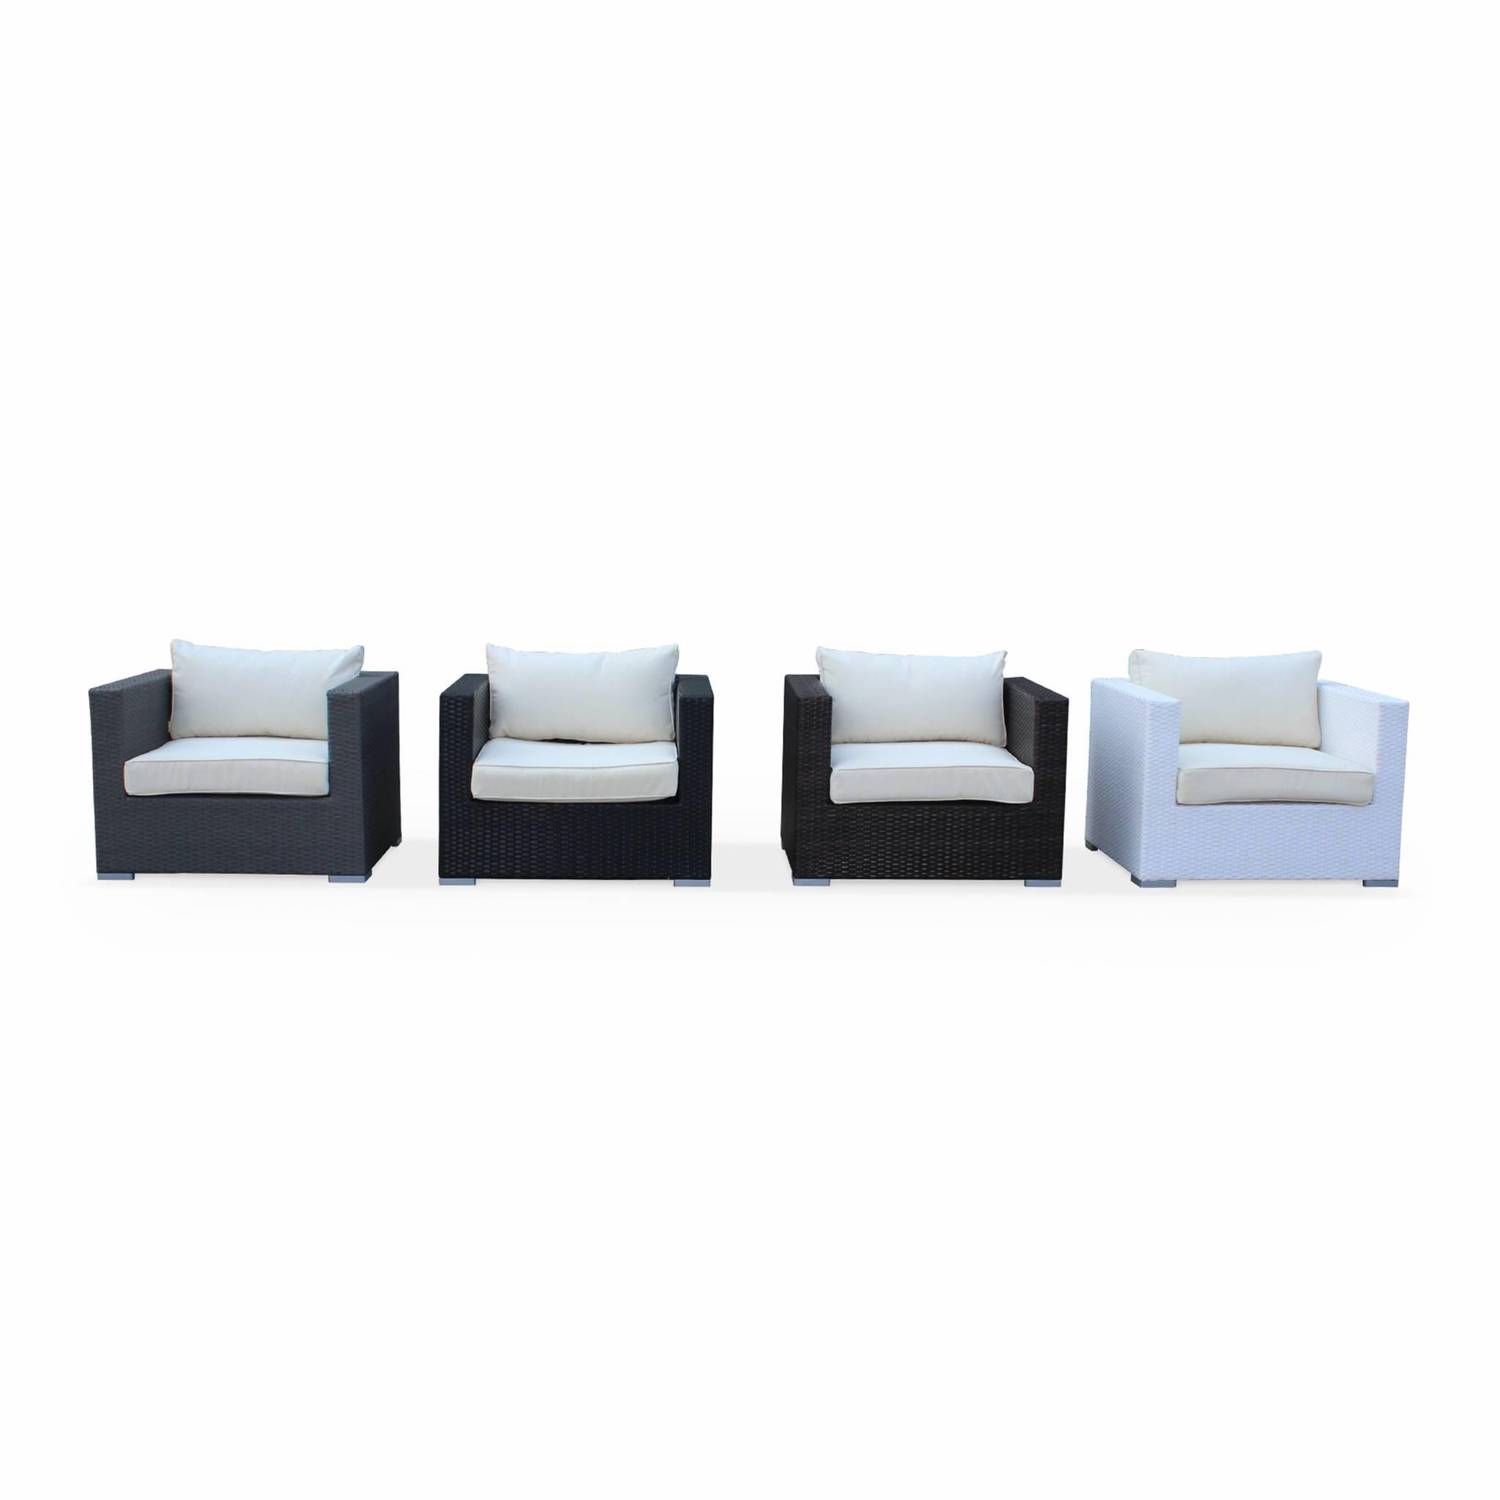 Complete set of cushion covers - Napoli - Off-White Photo5